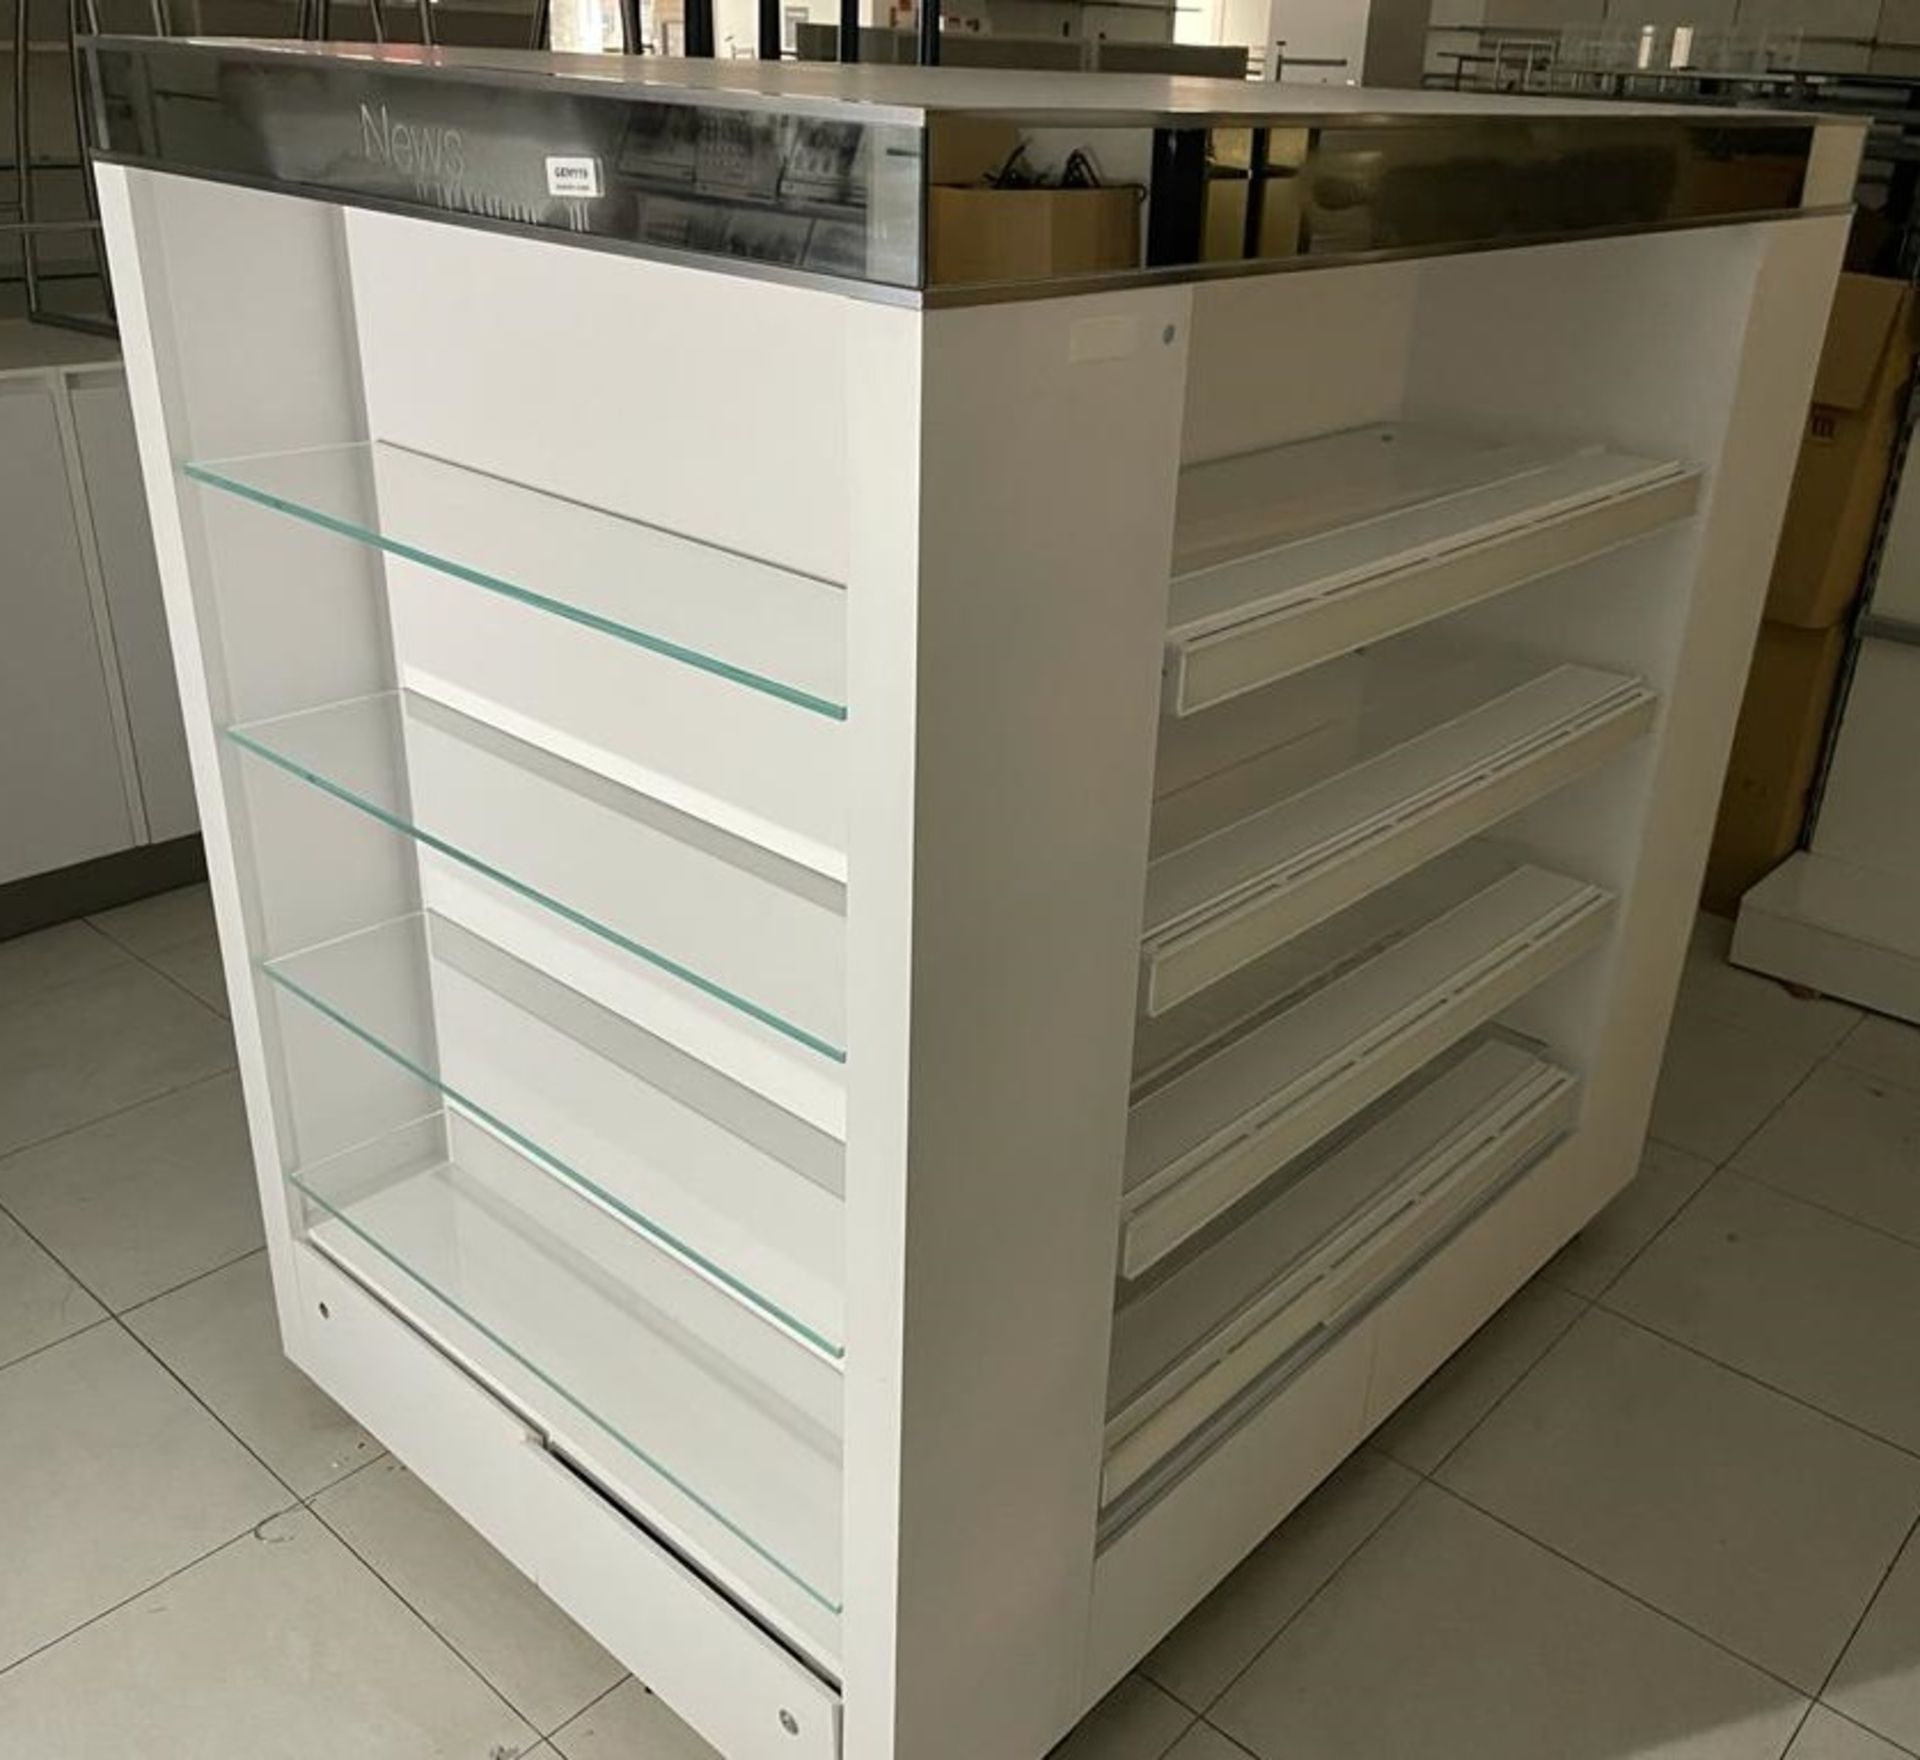 1 x Retail Four Sided Display Island With Shelves, Storage Drawers and Mirrored Panels - Size H150 x - Image 4 of 10